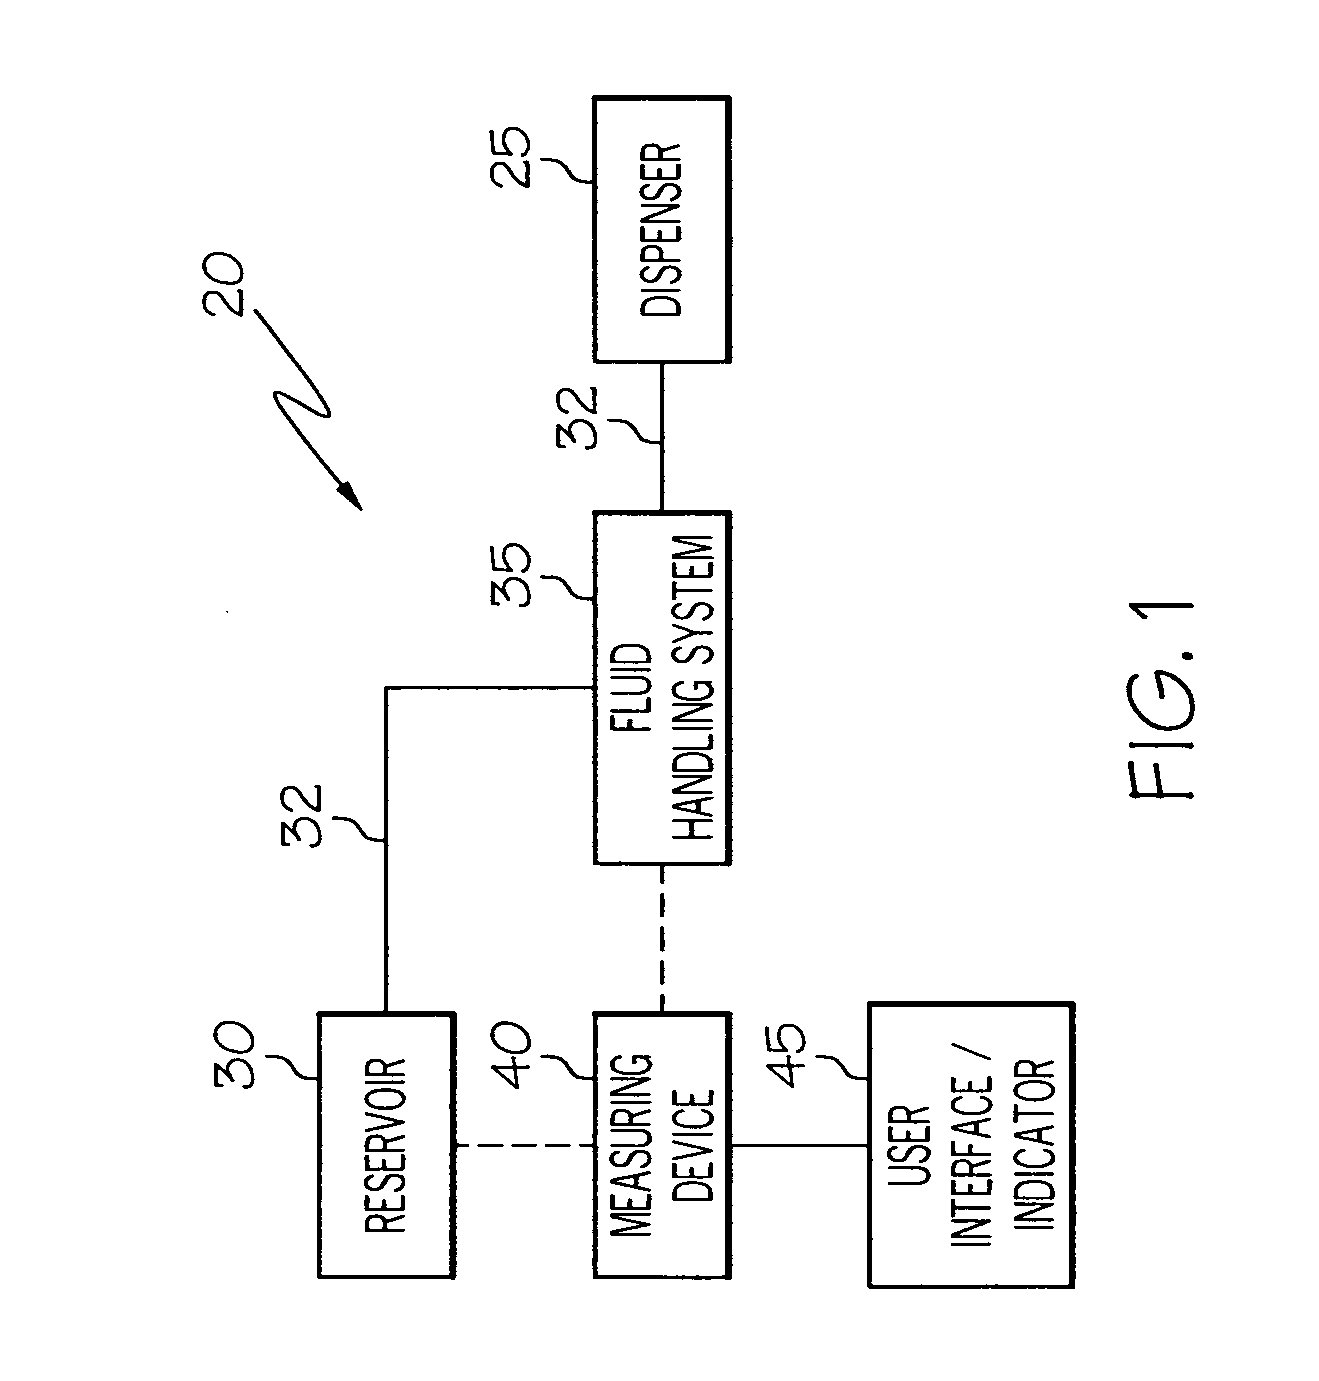 Fabric article treating device and system with user interface